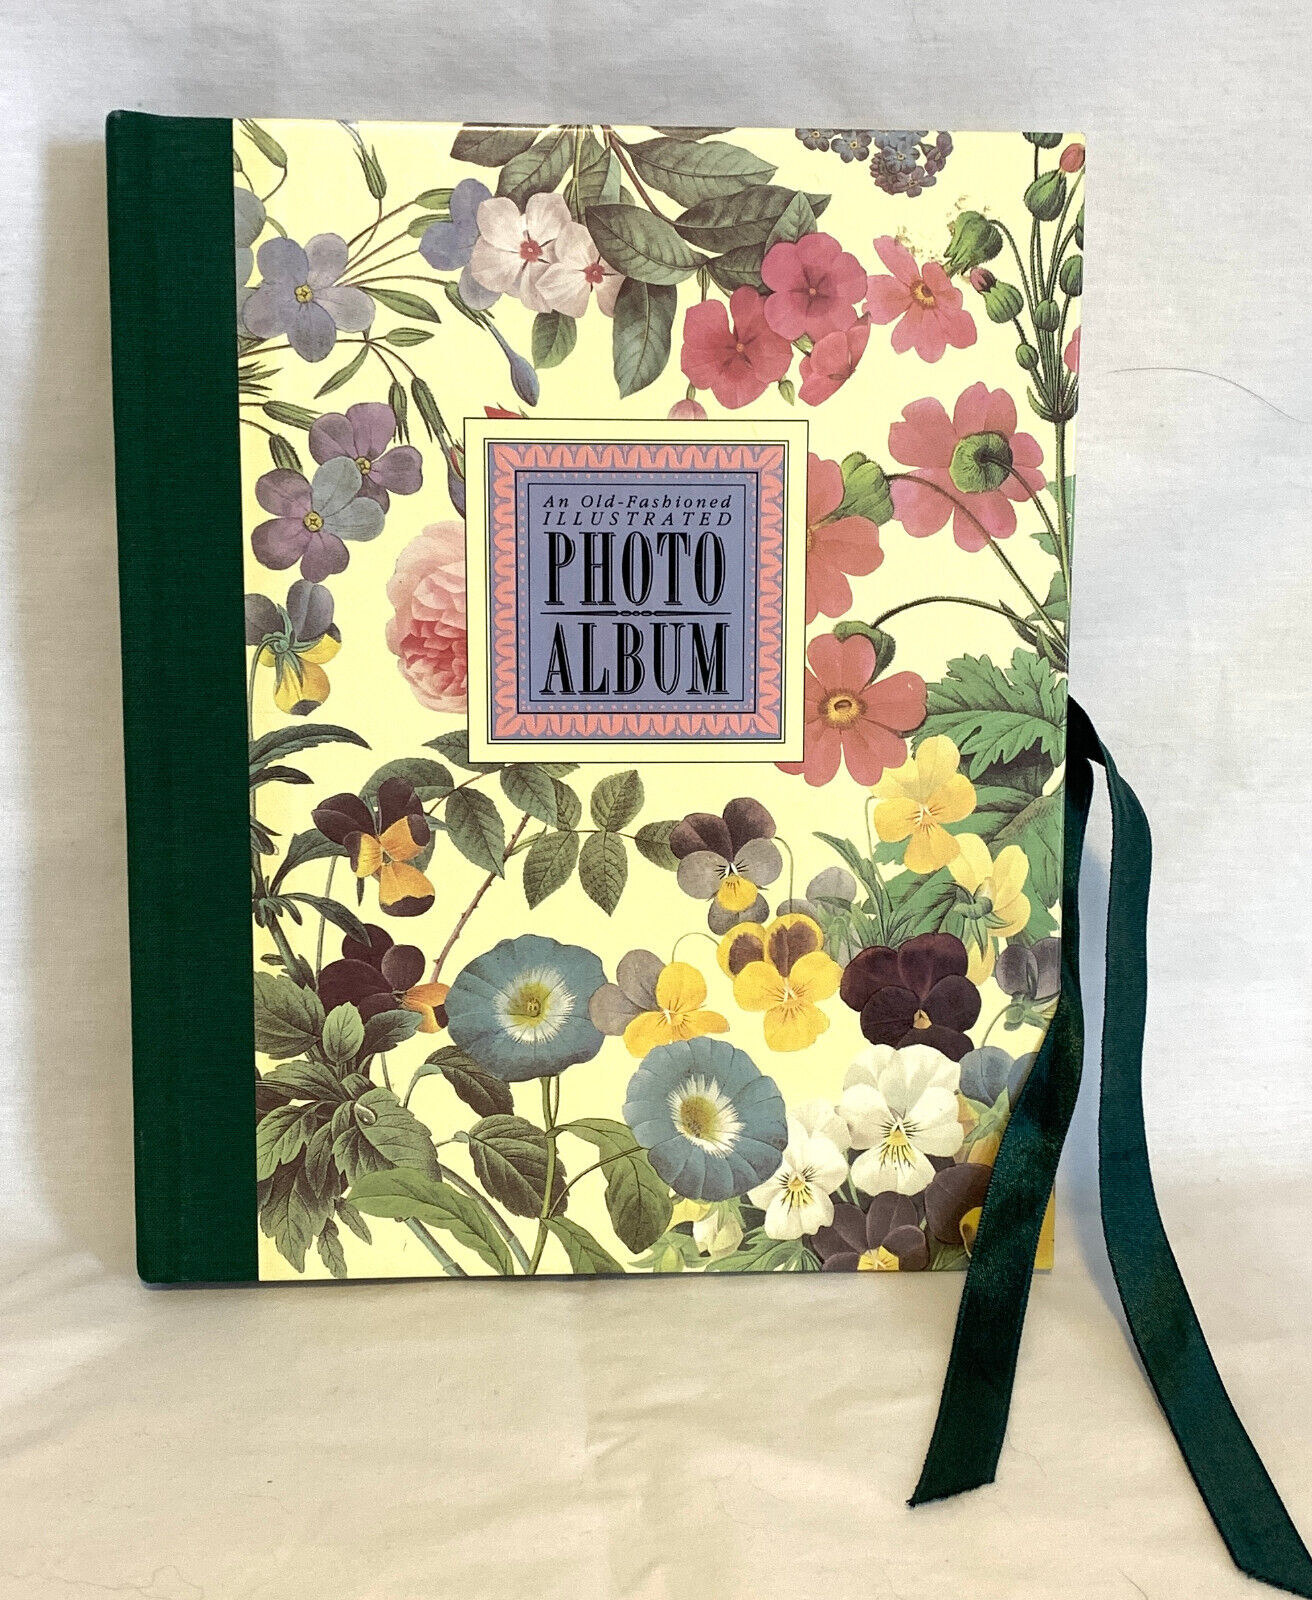 Lovely Vintage “An Old-Fashioned Illustrated” Photo Album